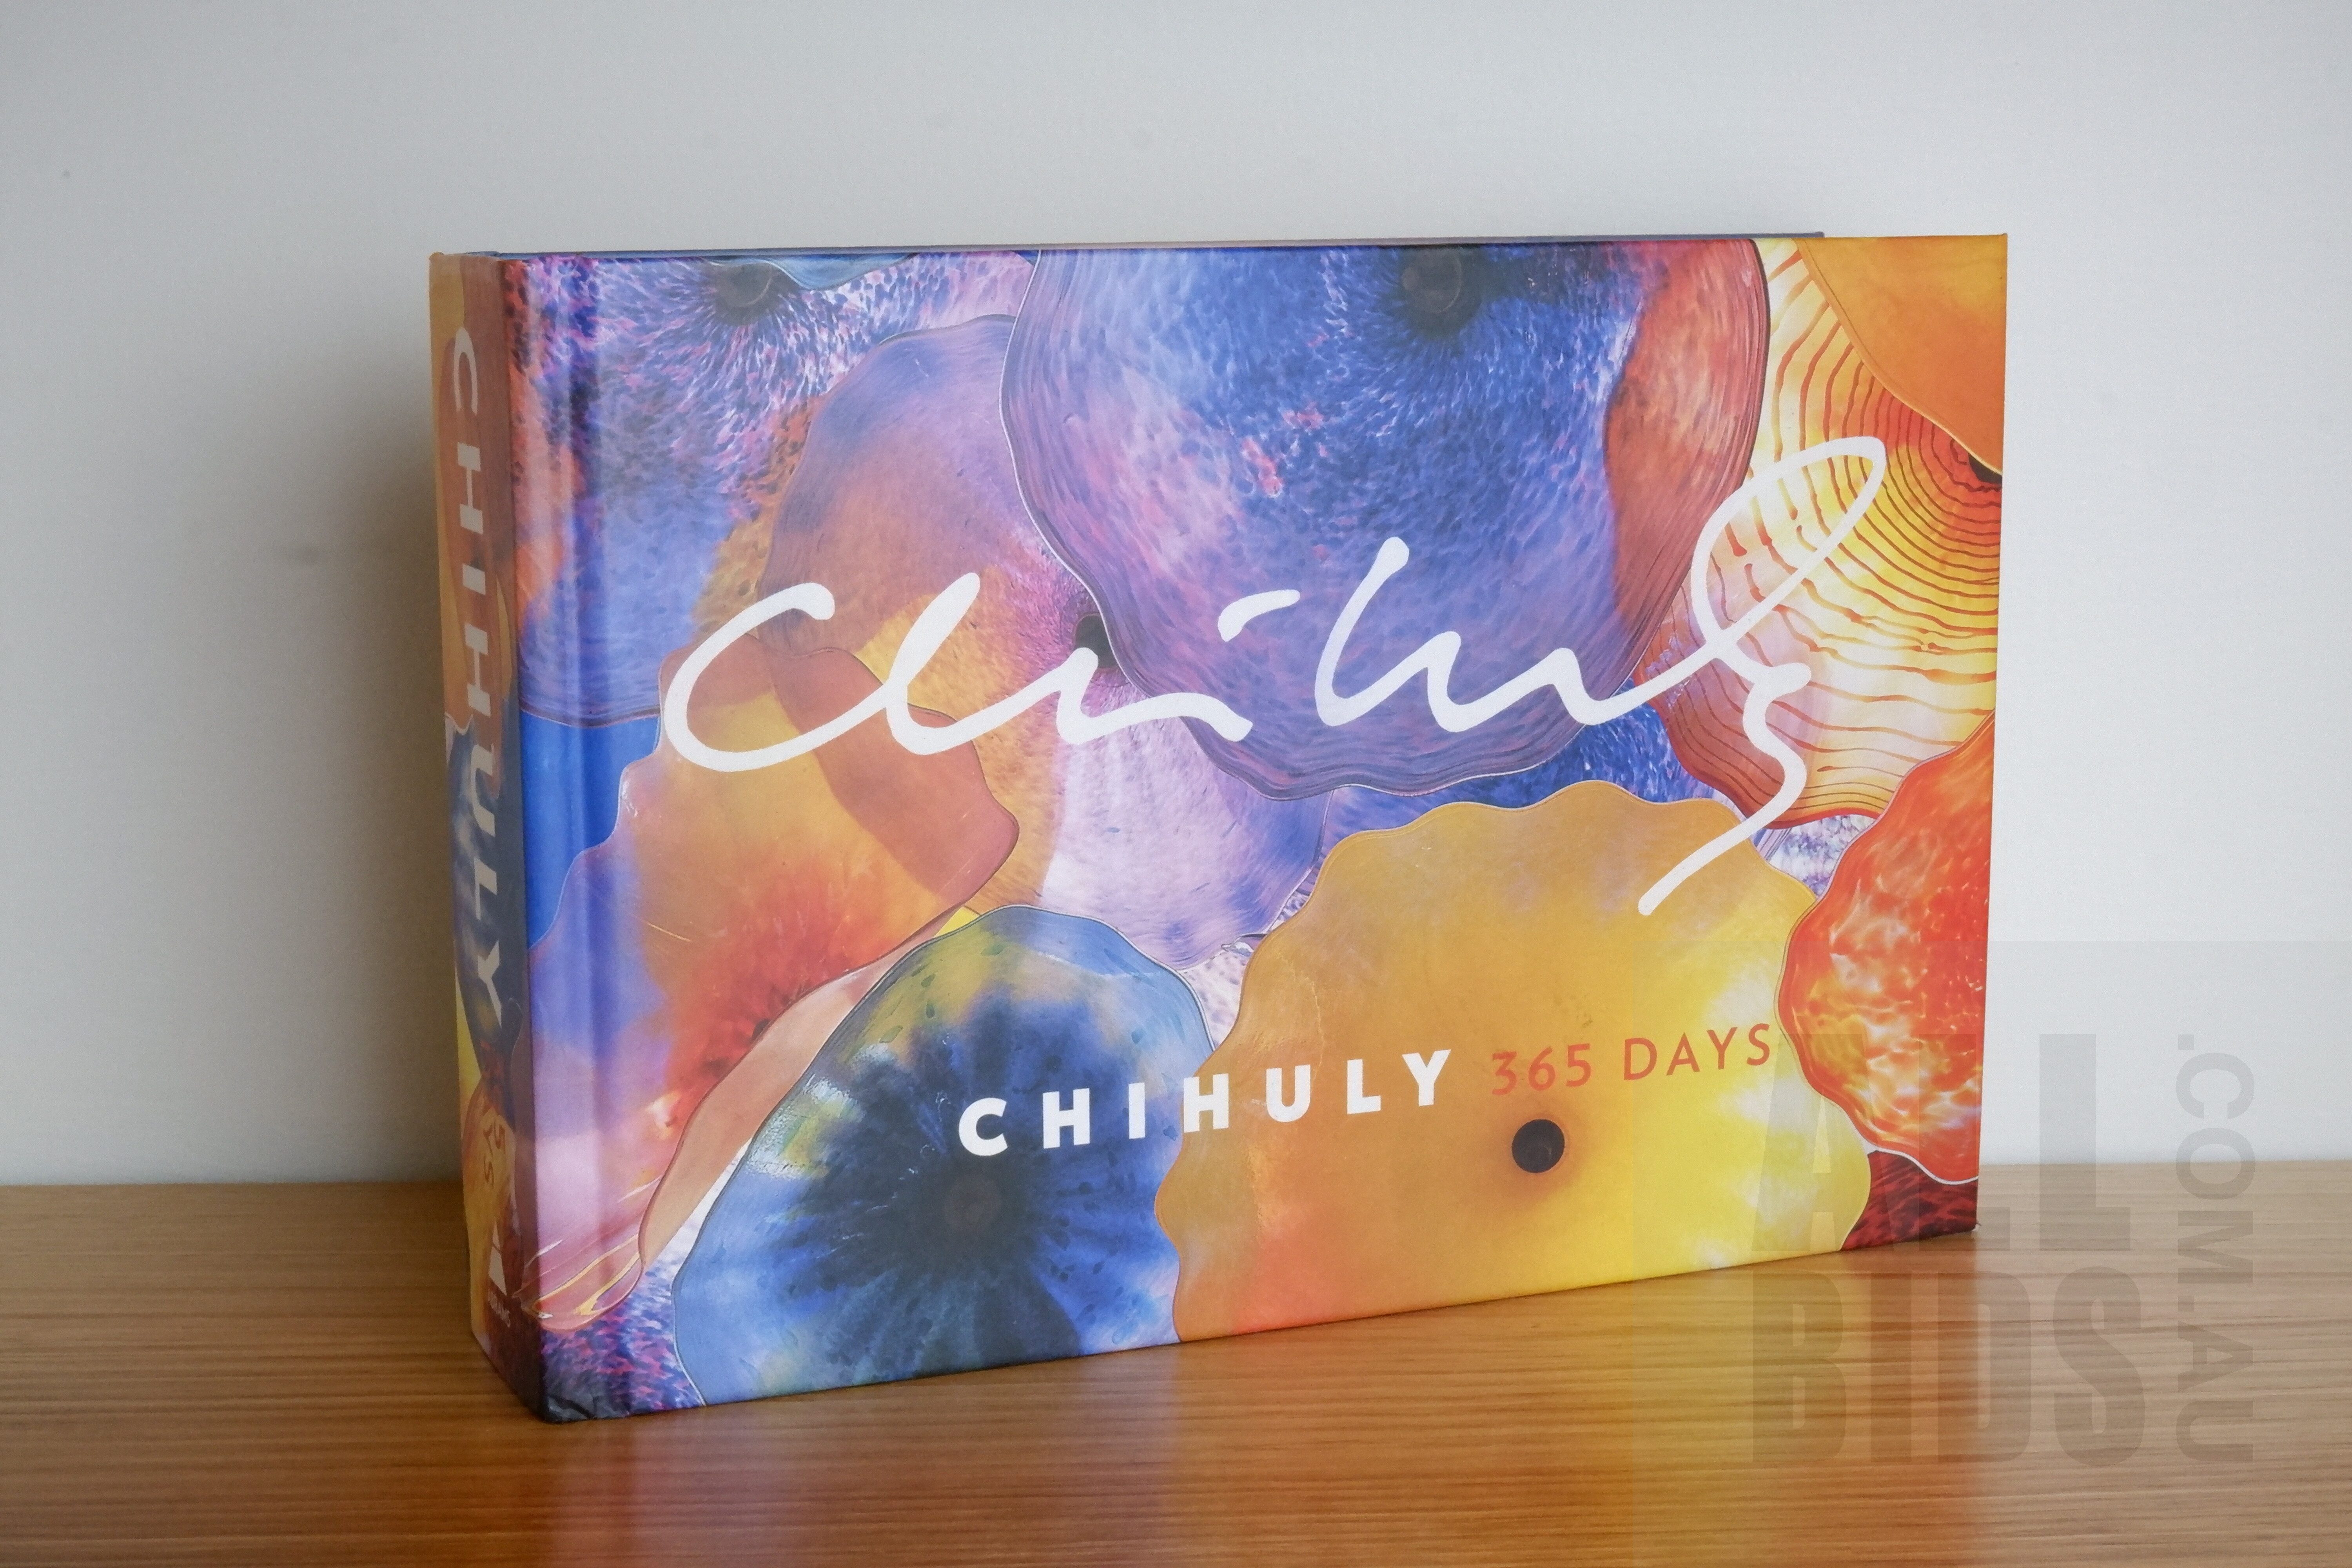 'Dale Chihuly 365 Days, Abbrams, New York'